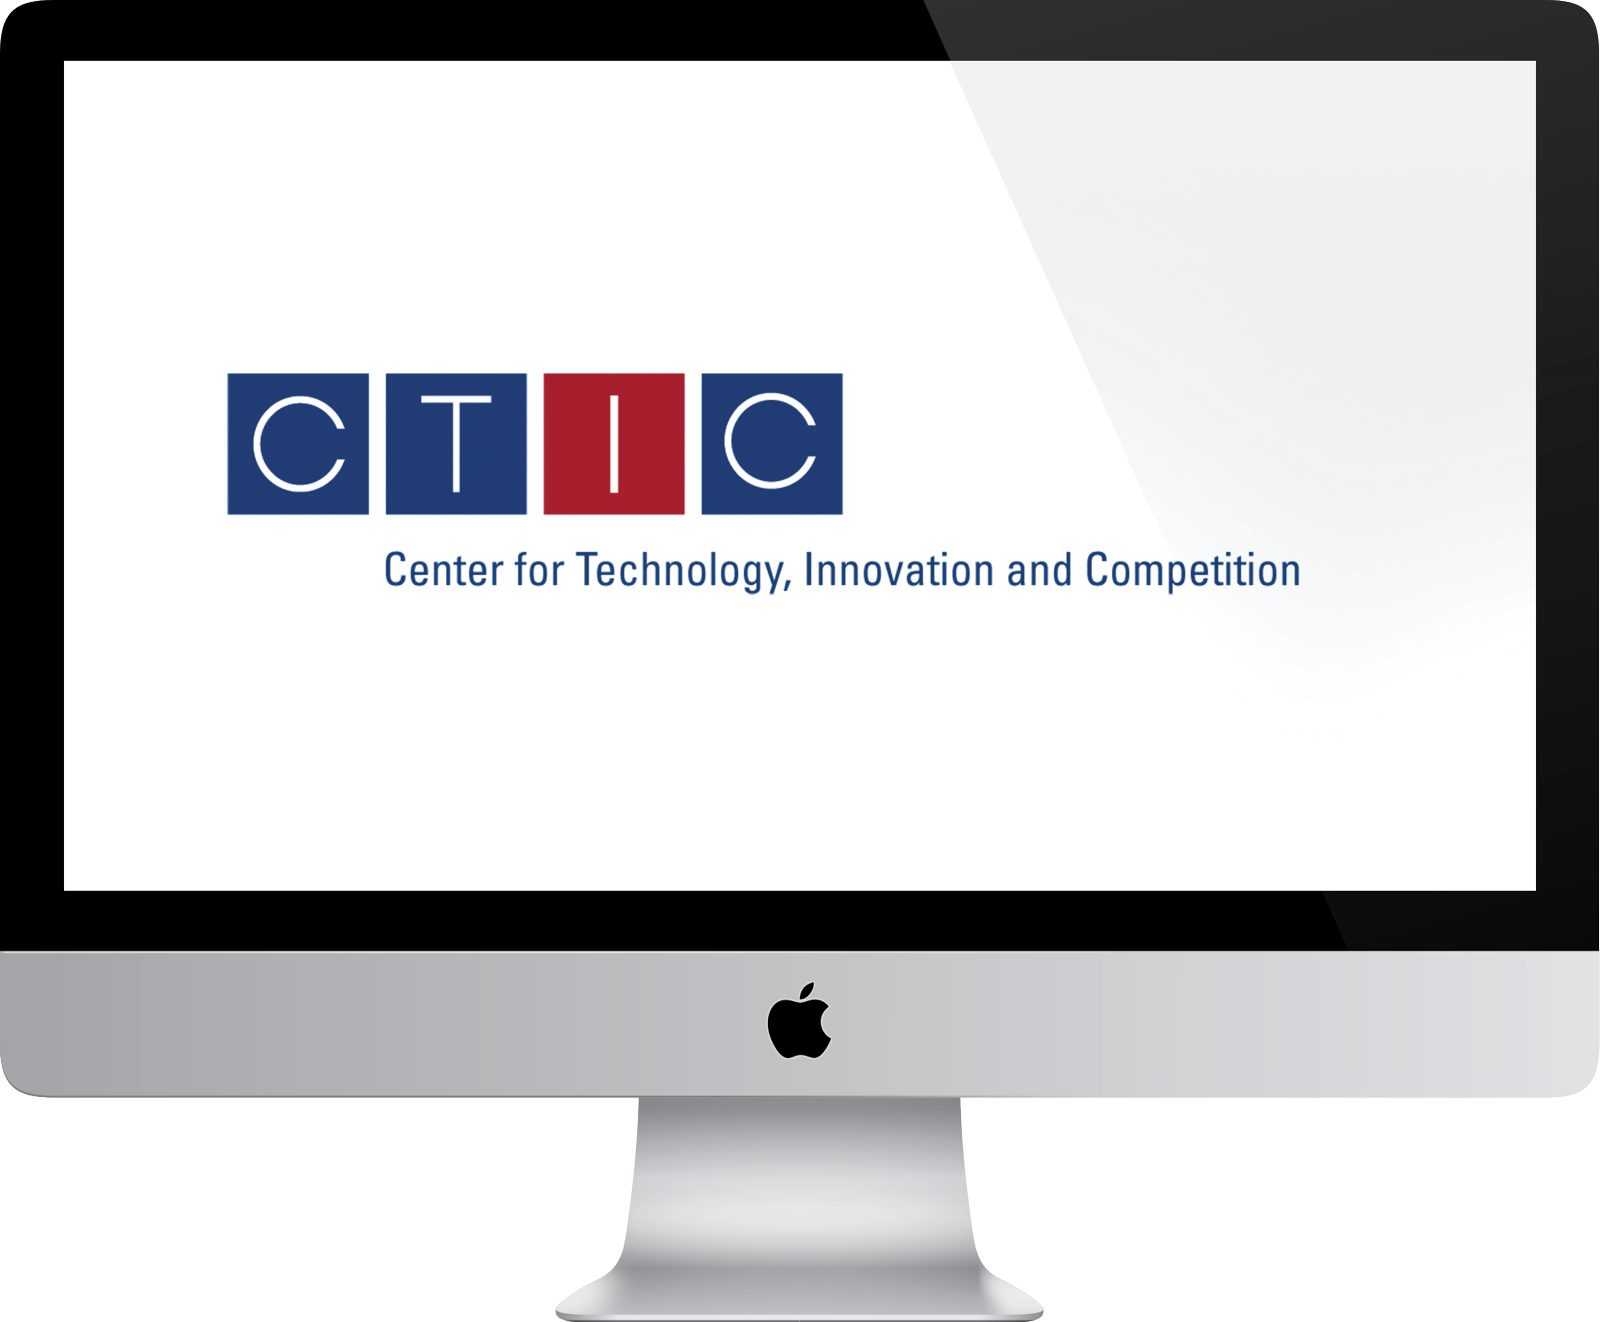 Center for Technology, Innovation and Competition